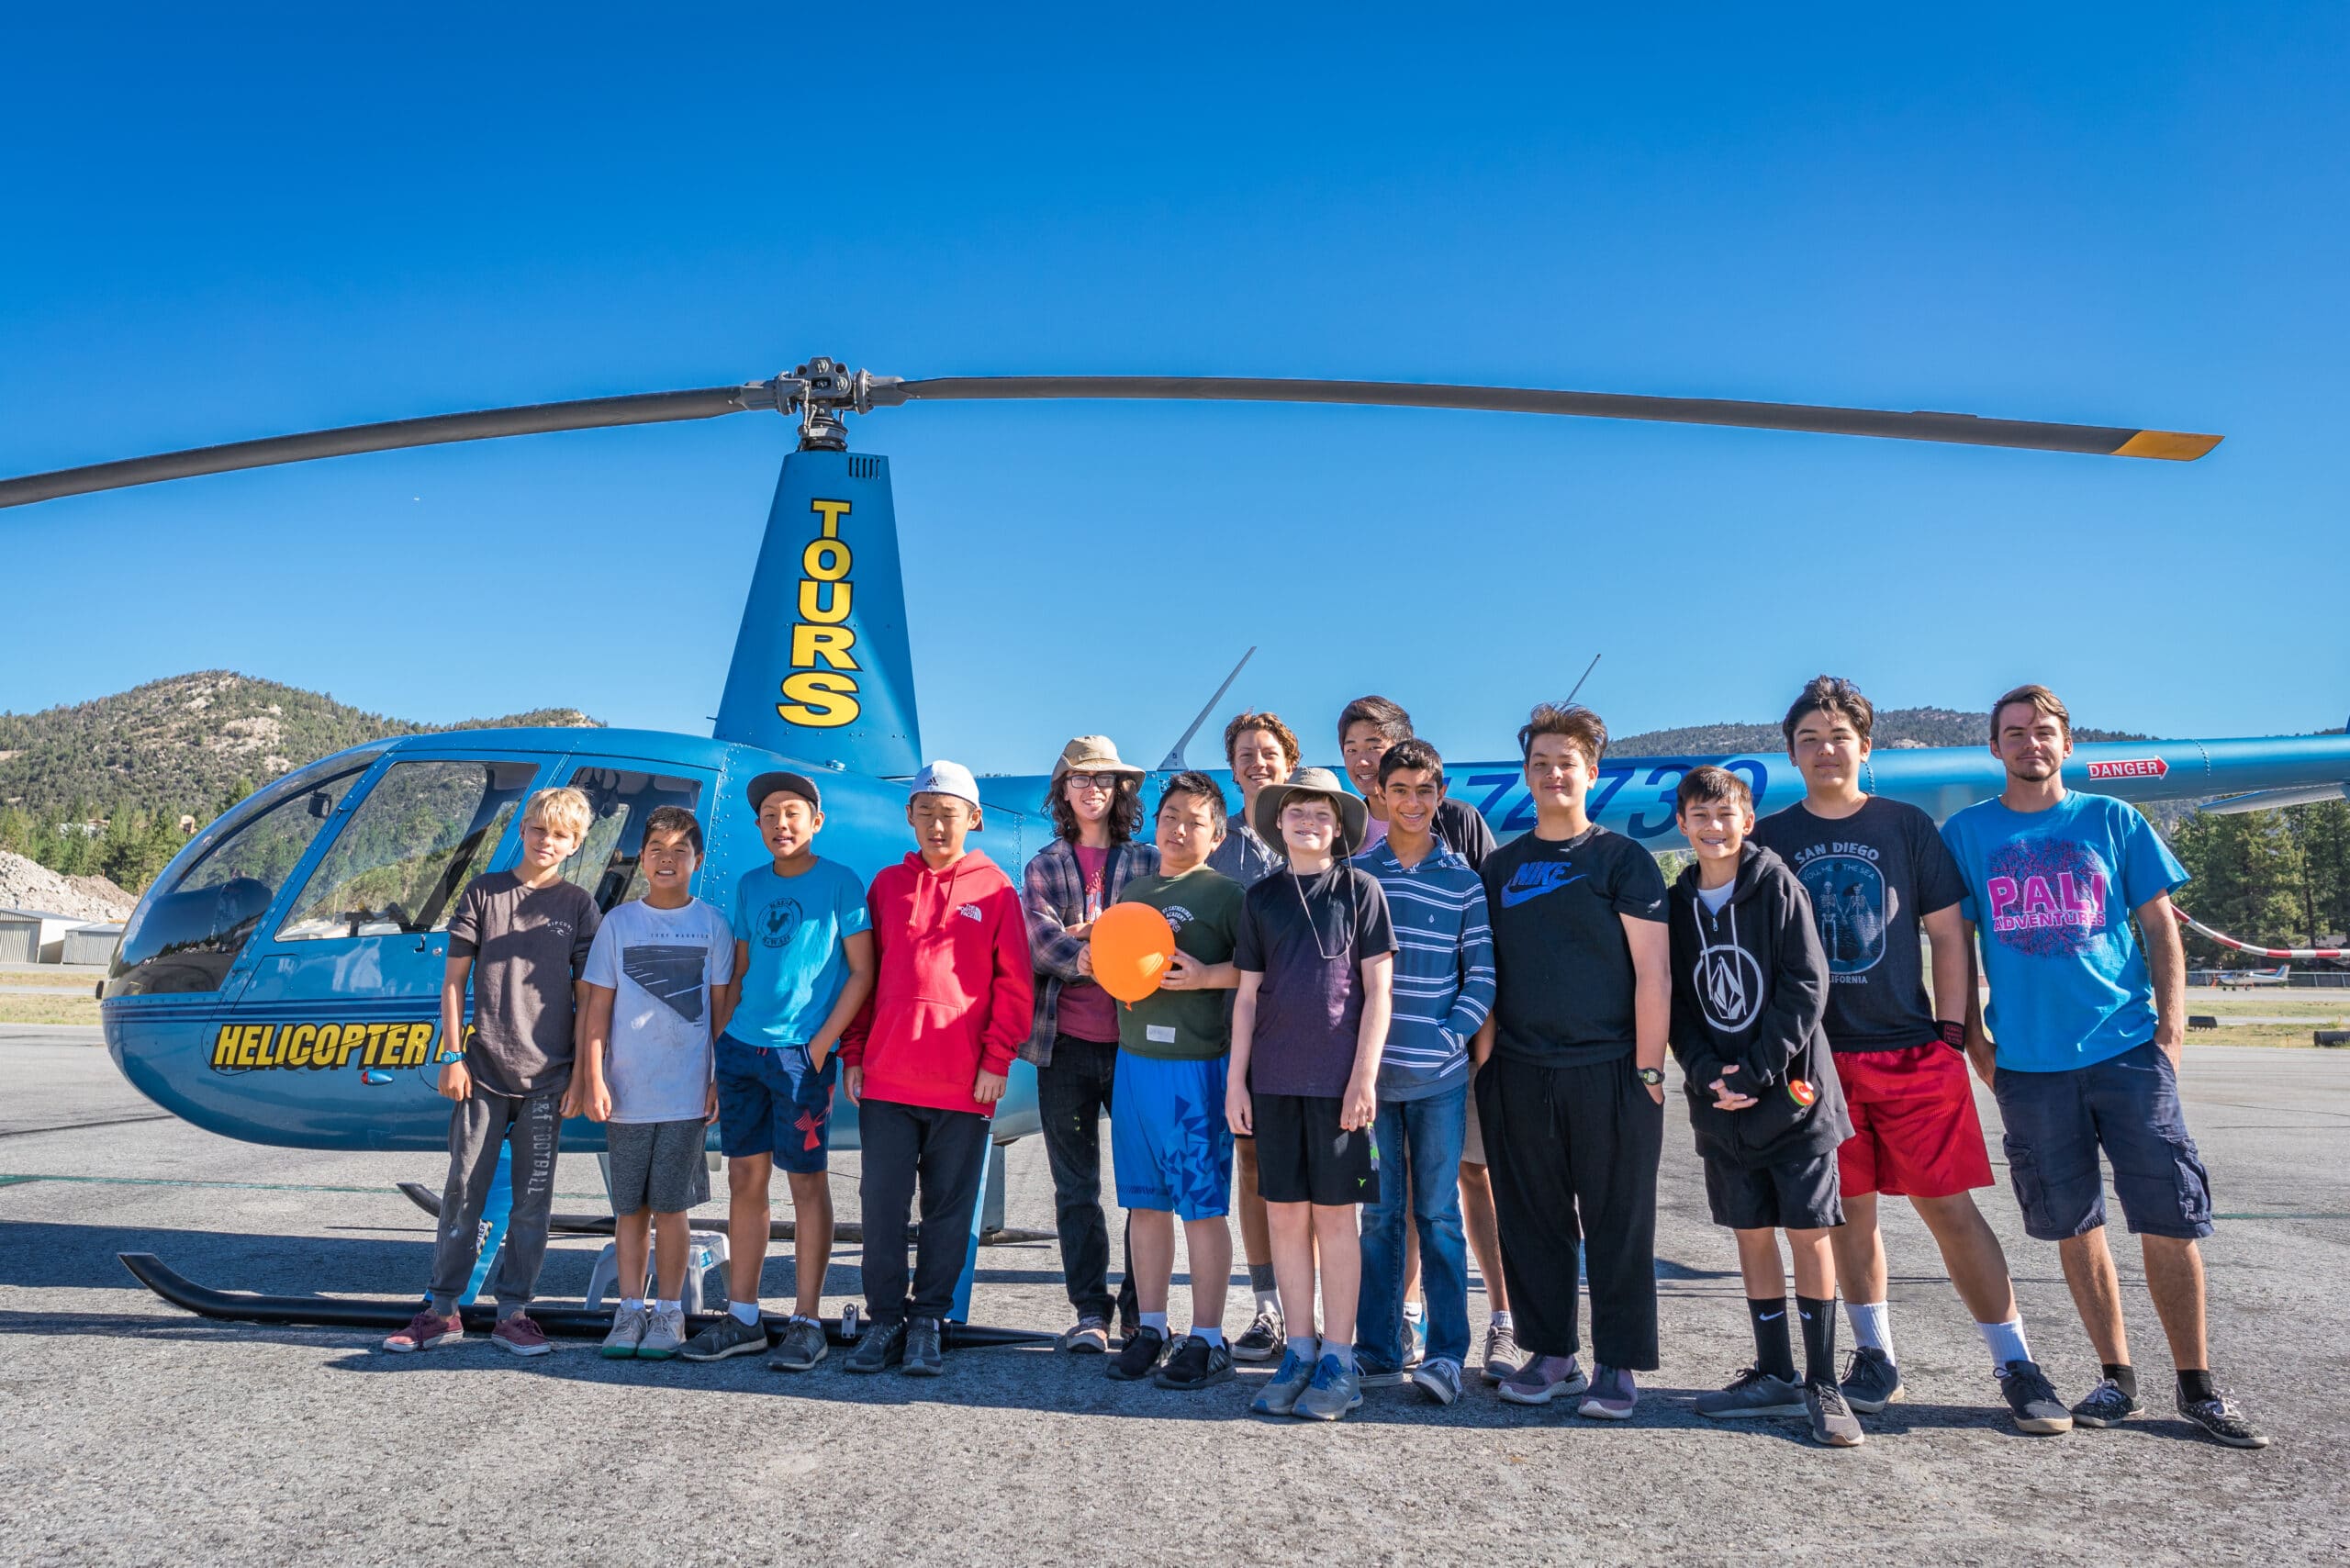 Pali campers standing in front of a helicopter